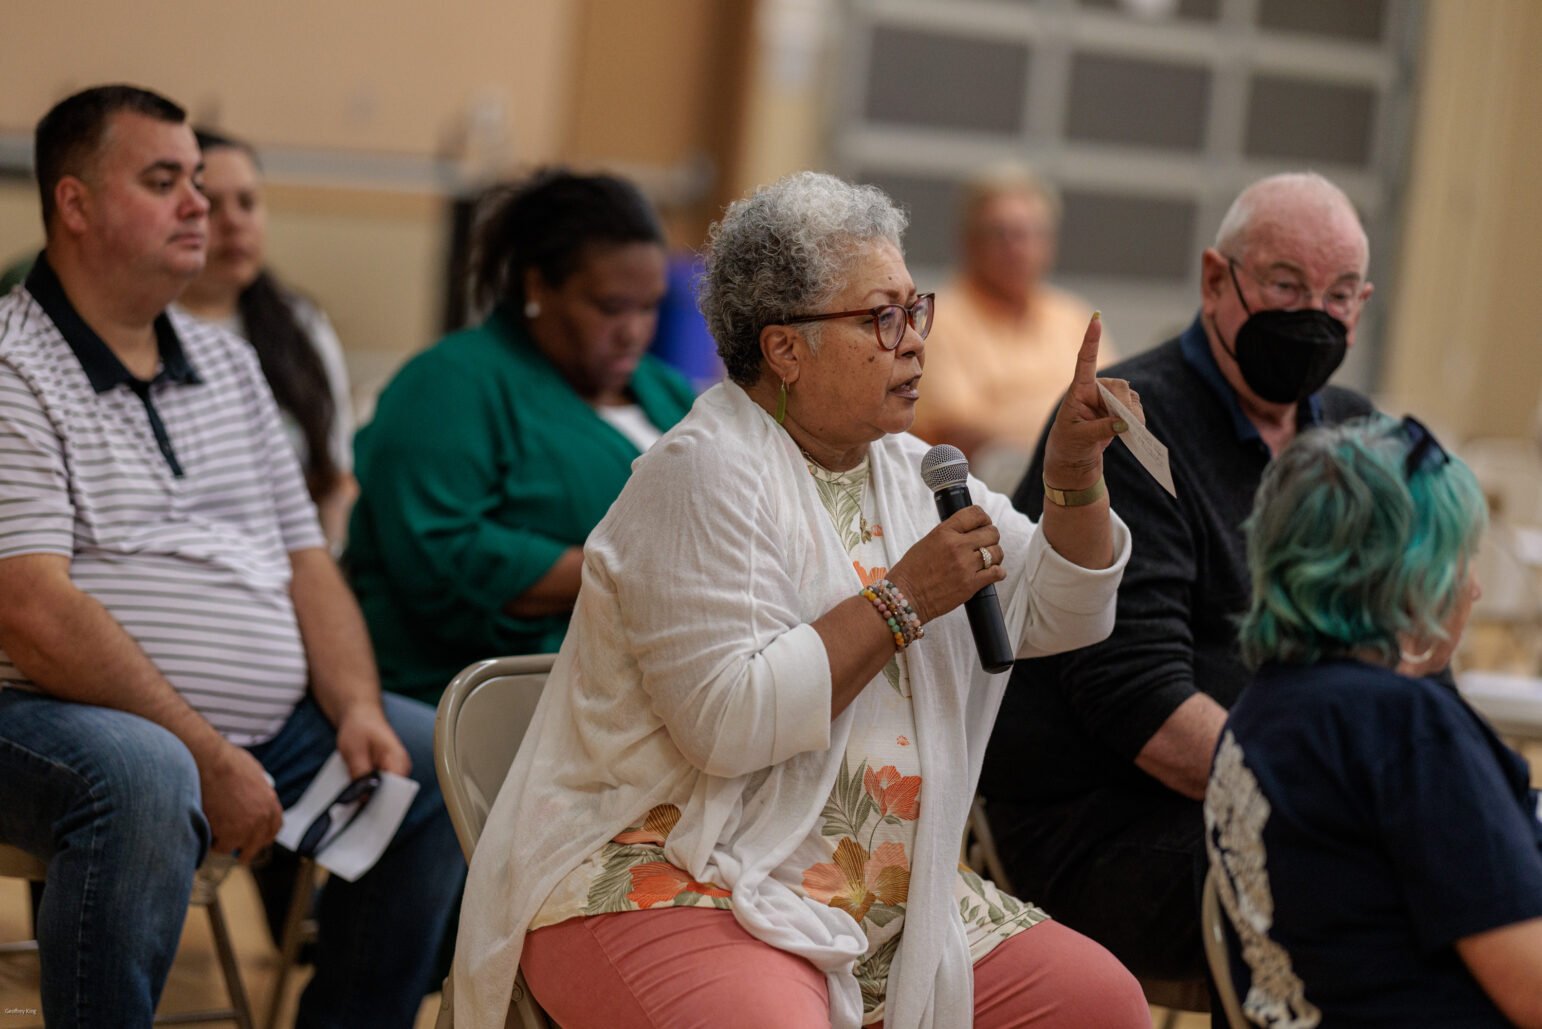 A focused woman with curly gray hair and glasses is seated, speaking into a microphone at a community meeting. She gestures with her hand, indicating a point of discussion. In the background, other attendees listen, with one man wearing a black respiratory mask looking towards her, indicating an engaged audience in a public forum.